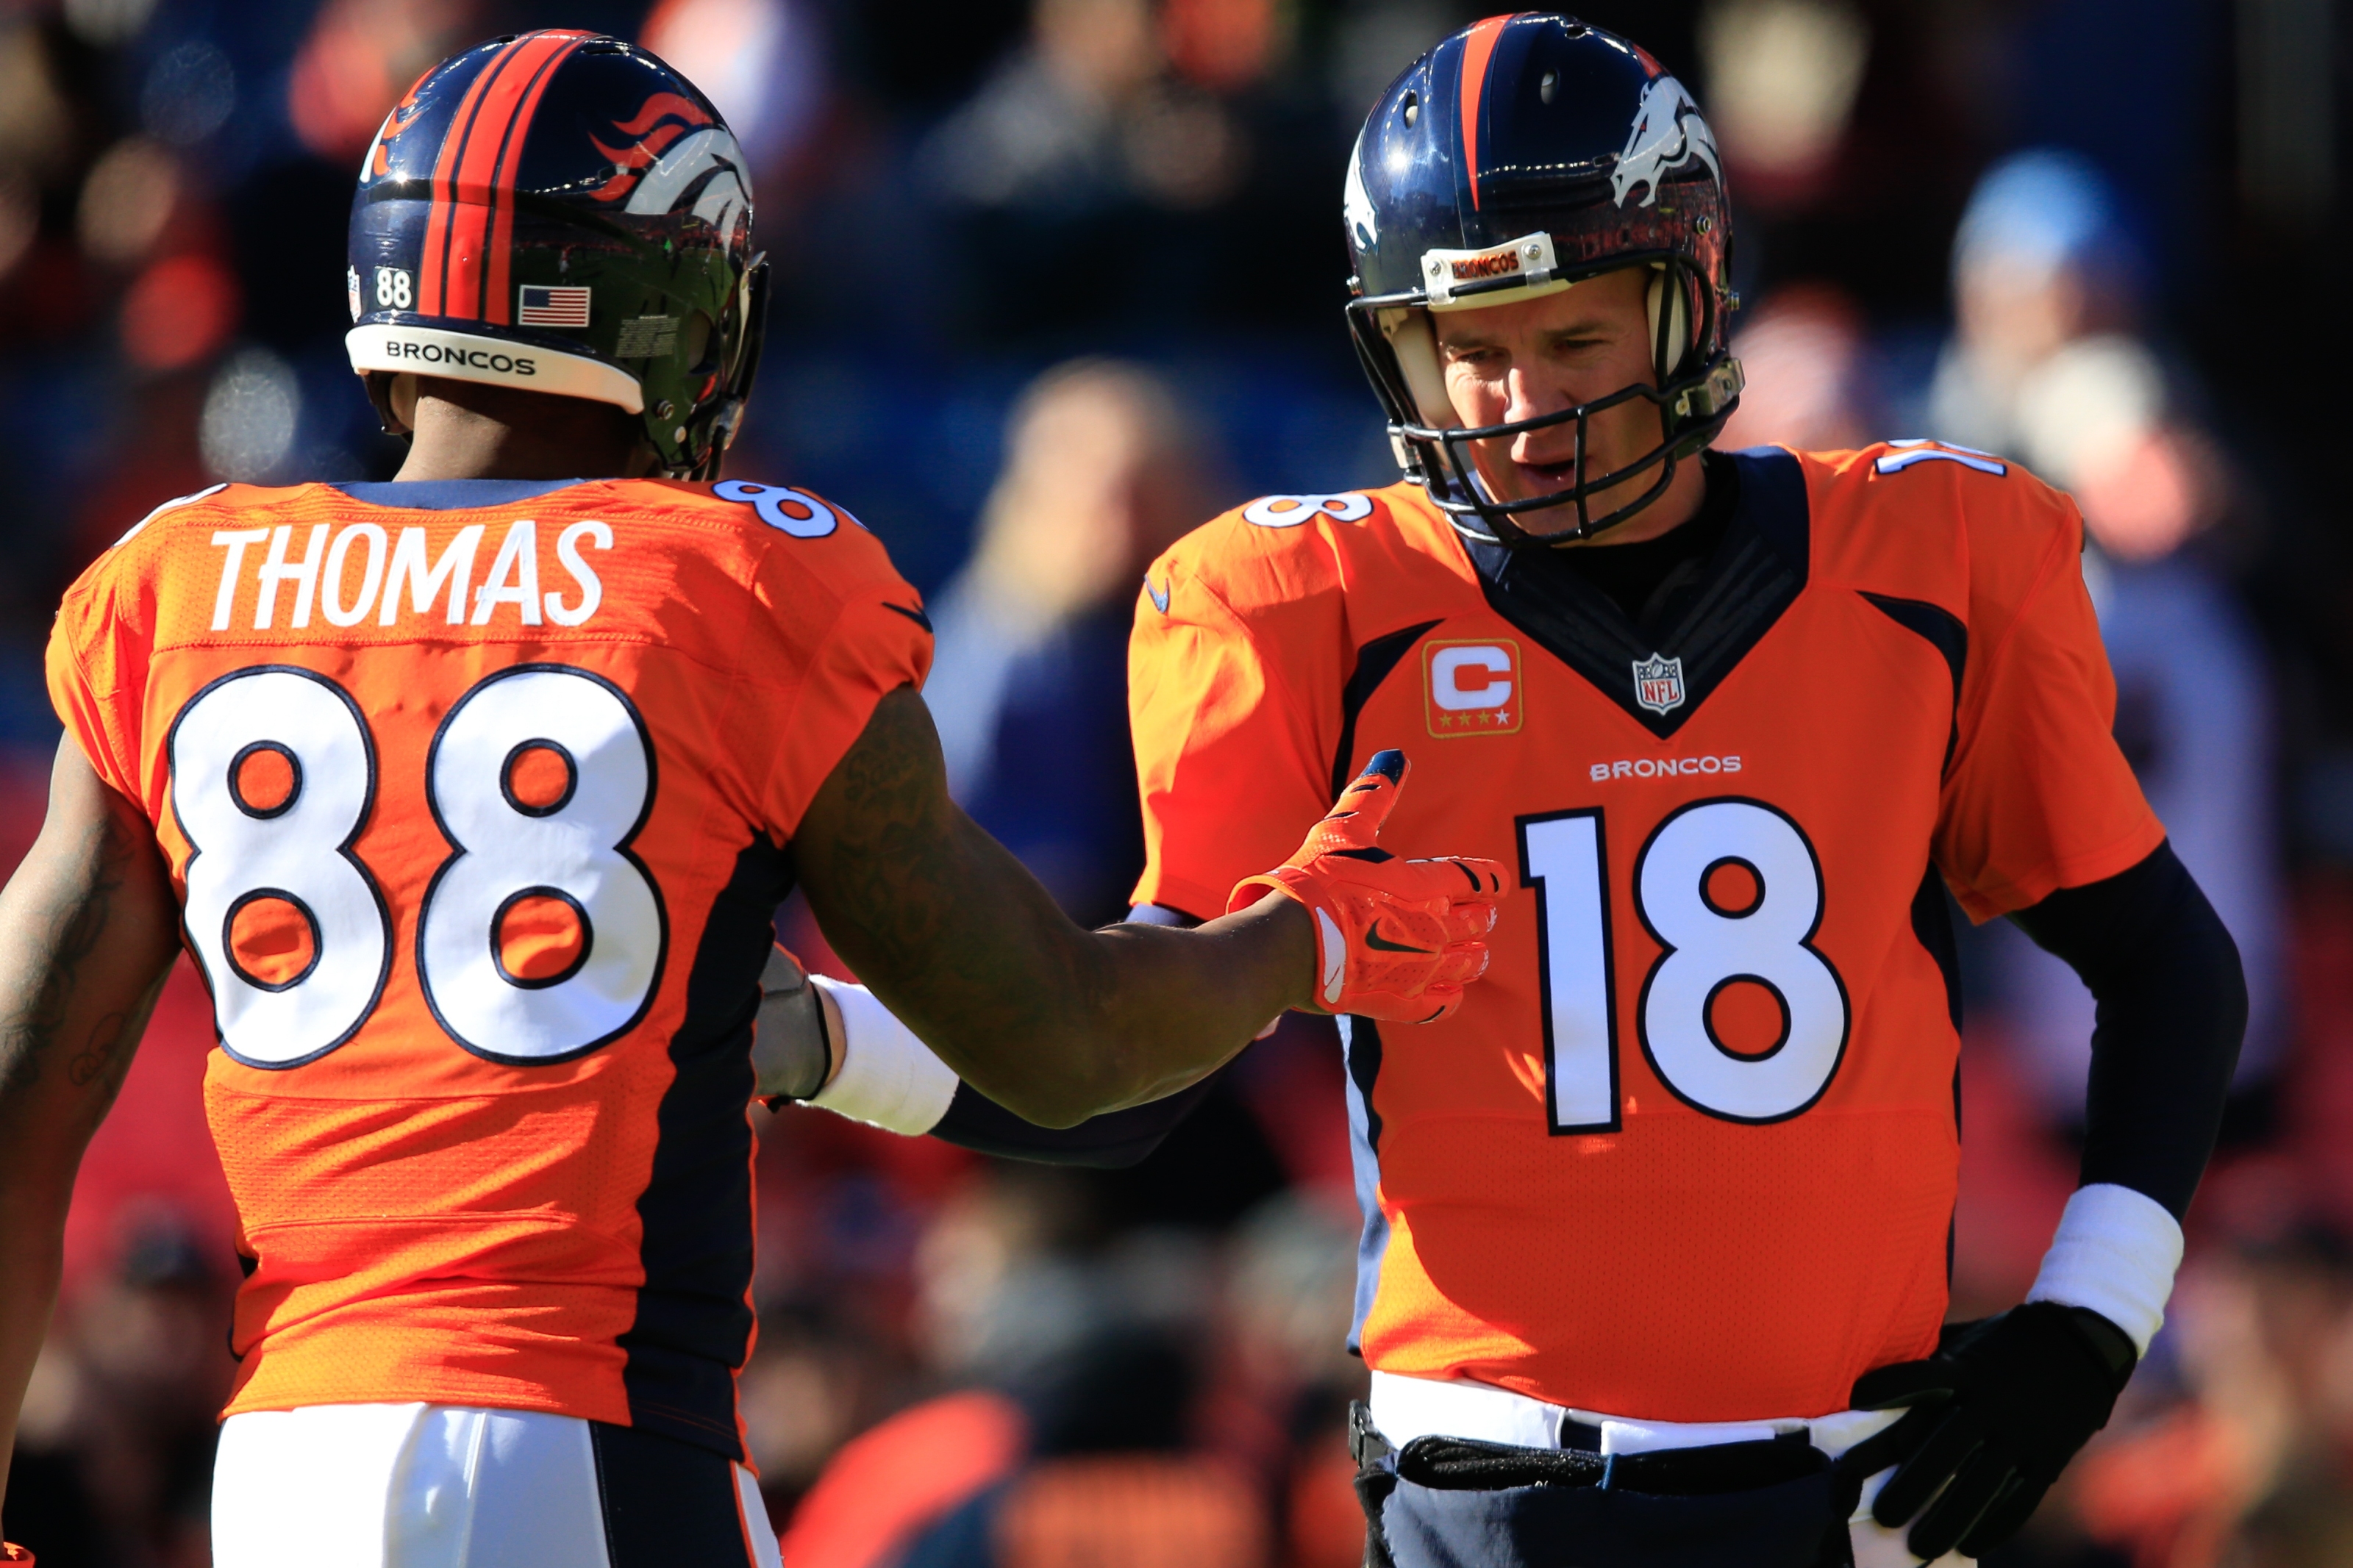 Peyton Manning: Former Vol gives statement on Demaryius Thomas death